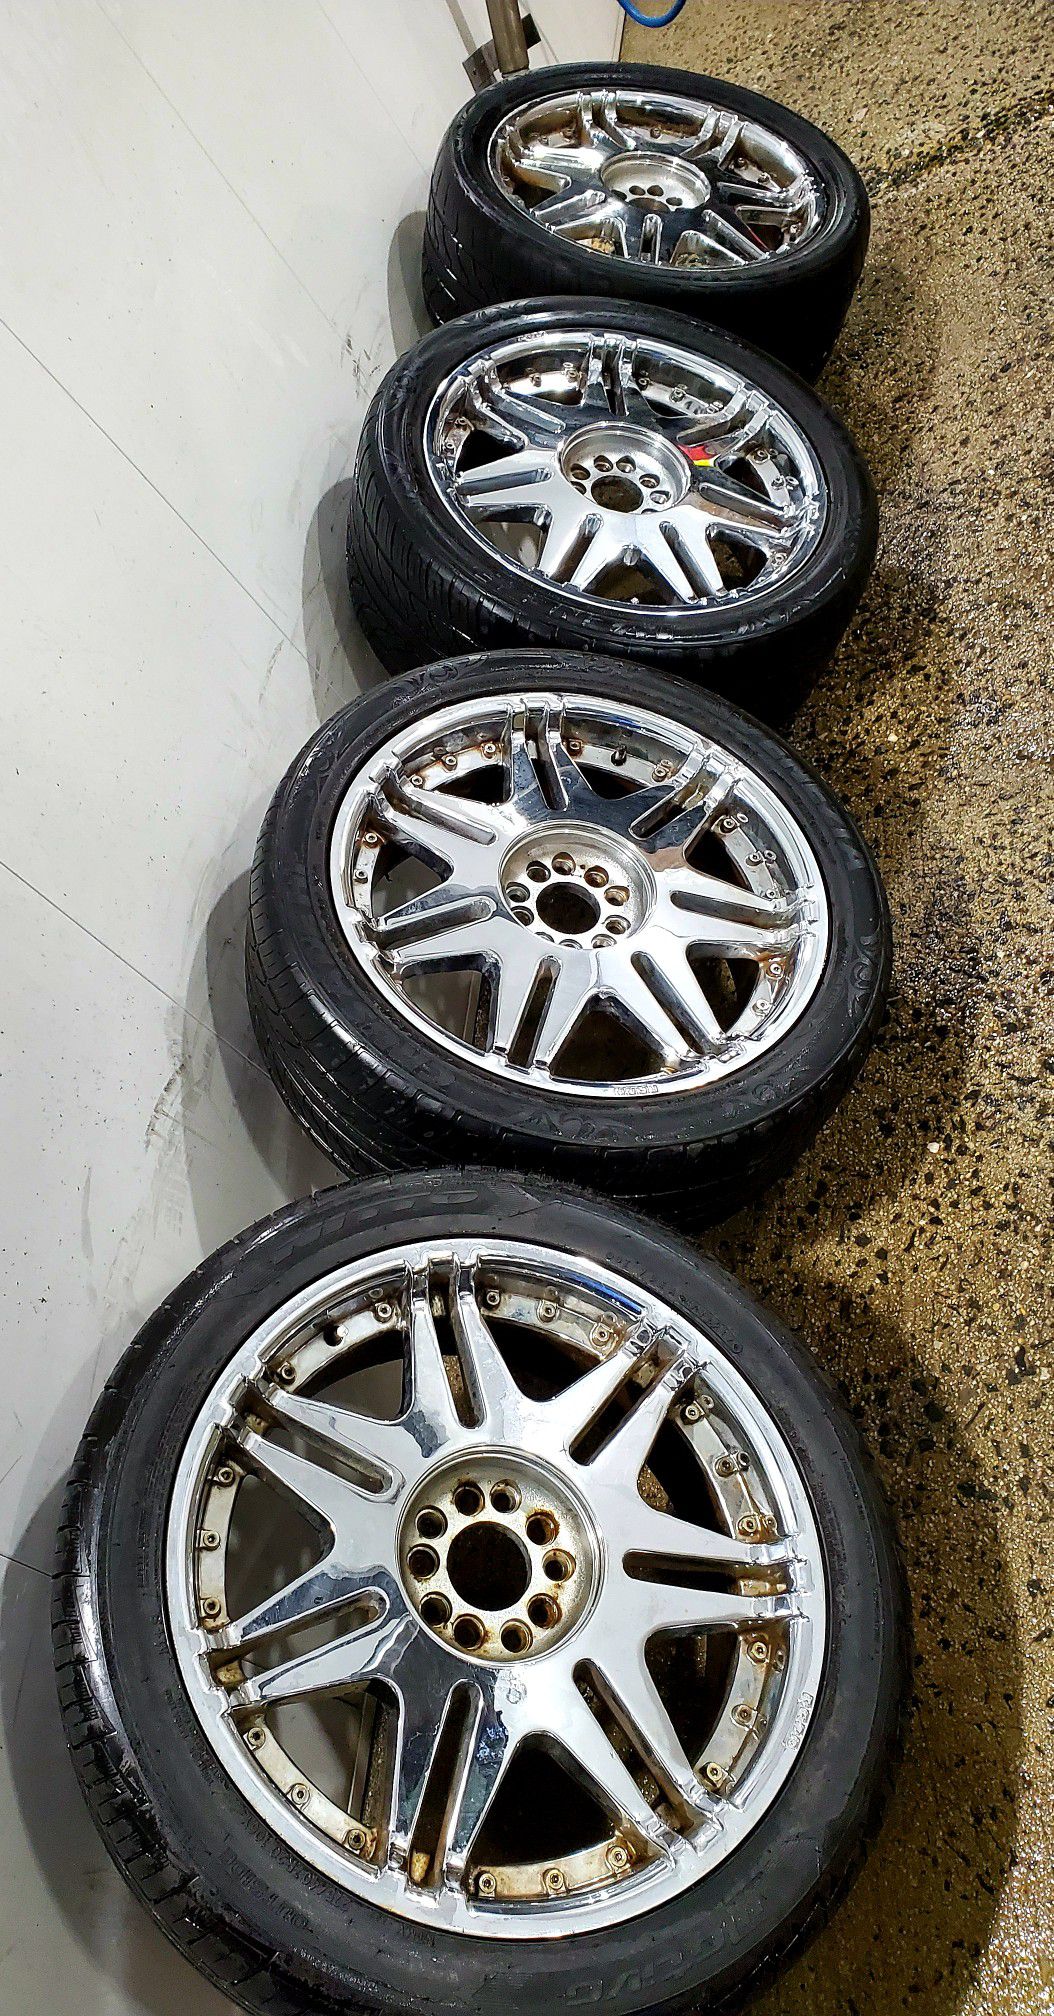 4 20 in 5x115 5x120 5x114.3 wheels rims and tires